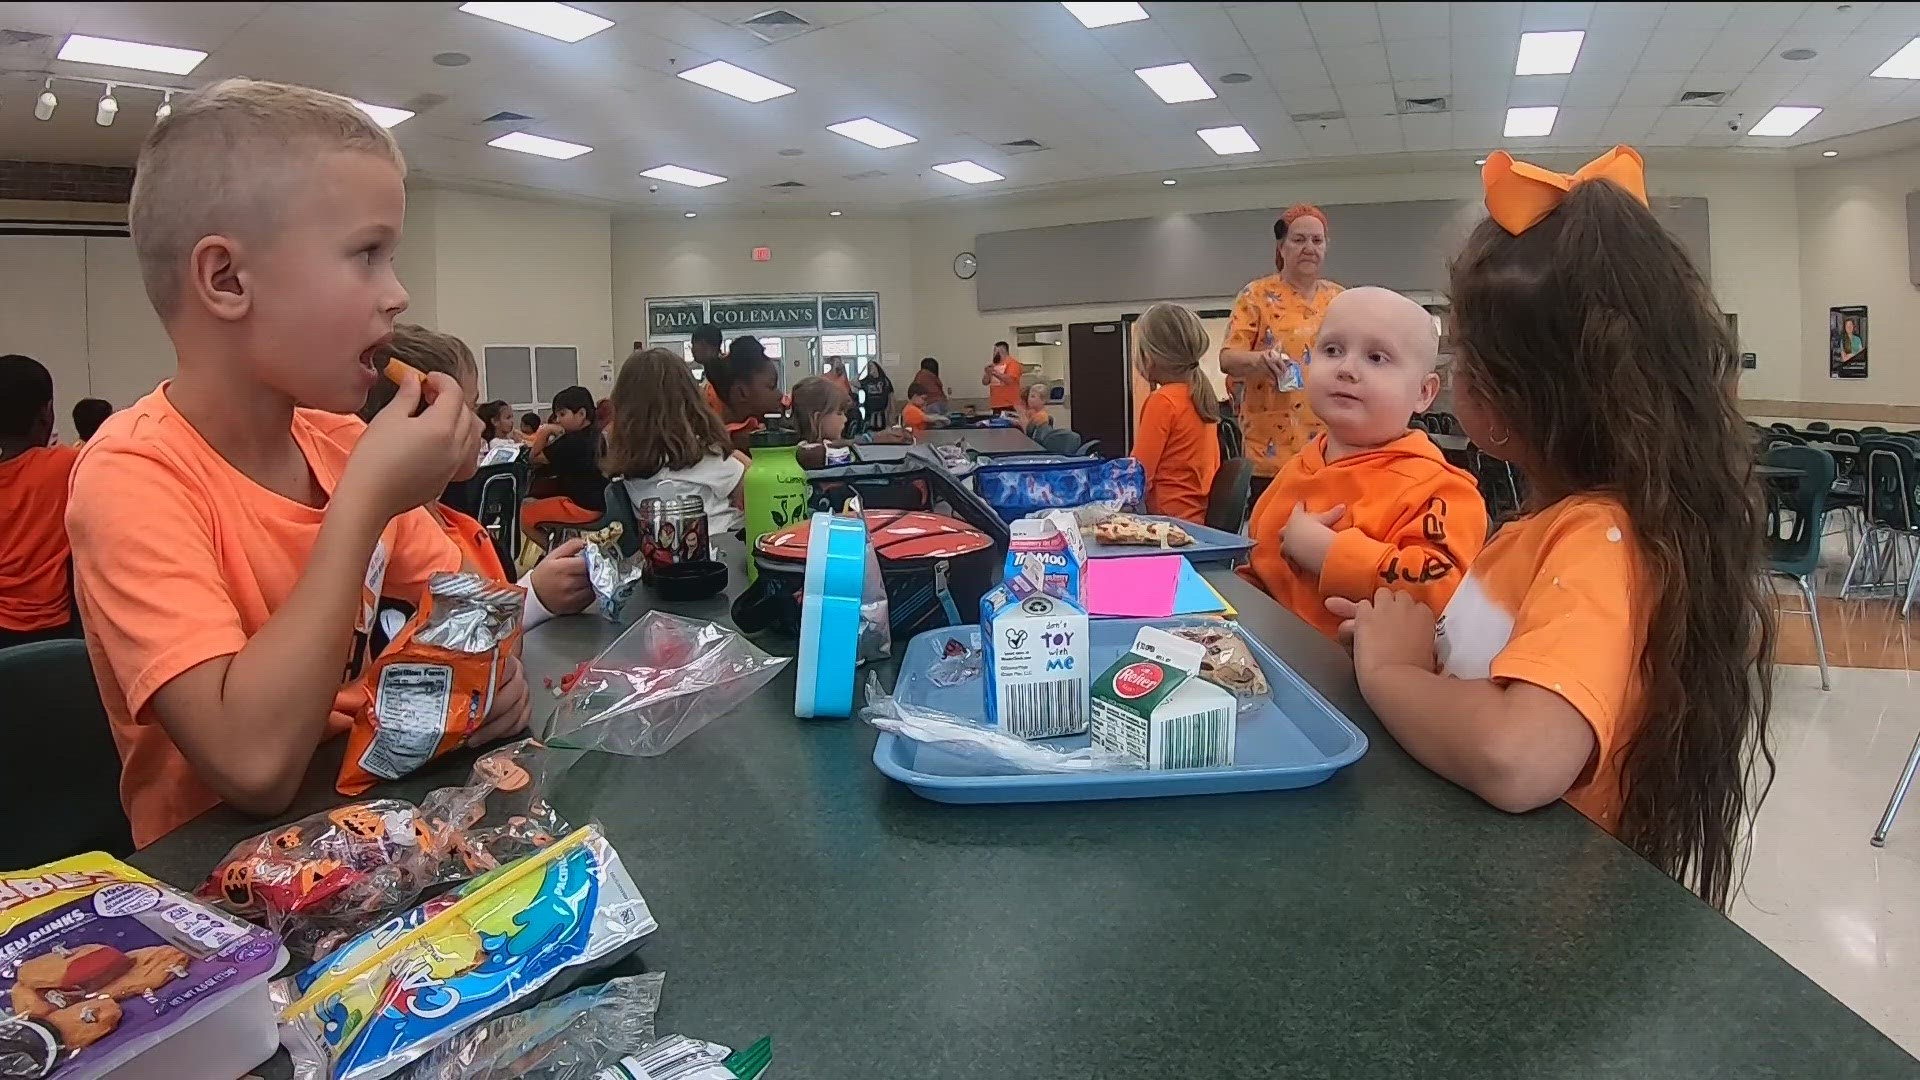 It's been seven months since six-year-old James O'Reilly III learned he had leukemia. On Friday, Beverly Elementary surprised him with an orange-out.